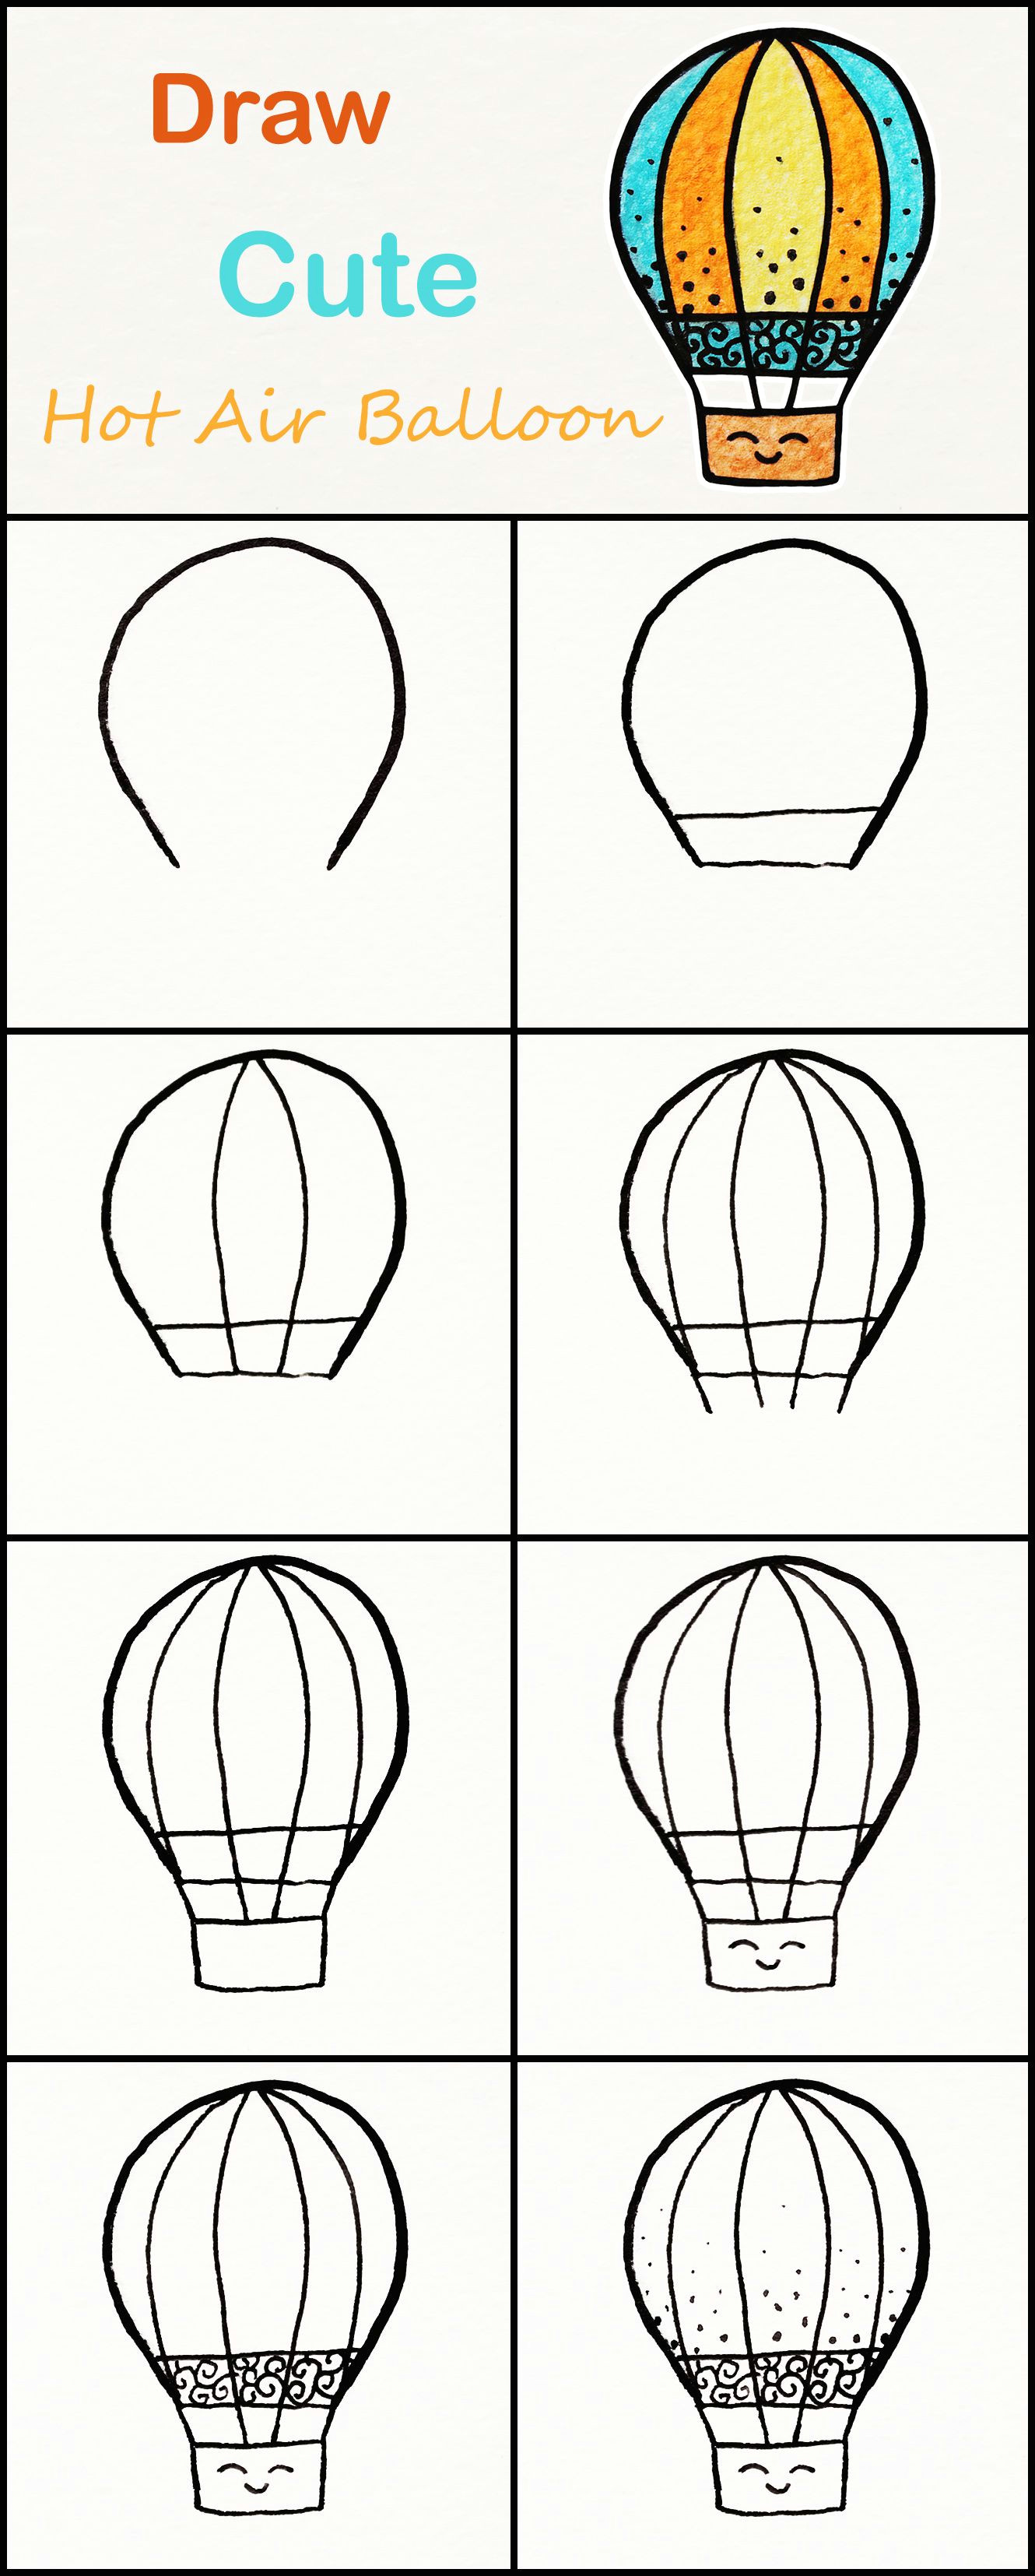 Drawing Cute Balloons Learn How to Draw A Cute Hot Air Balloon Step by Step A Very Simple